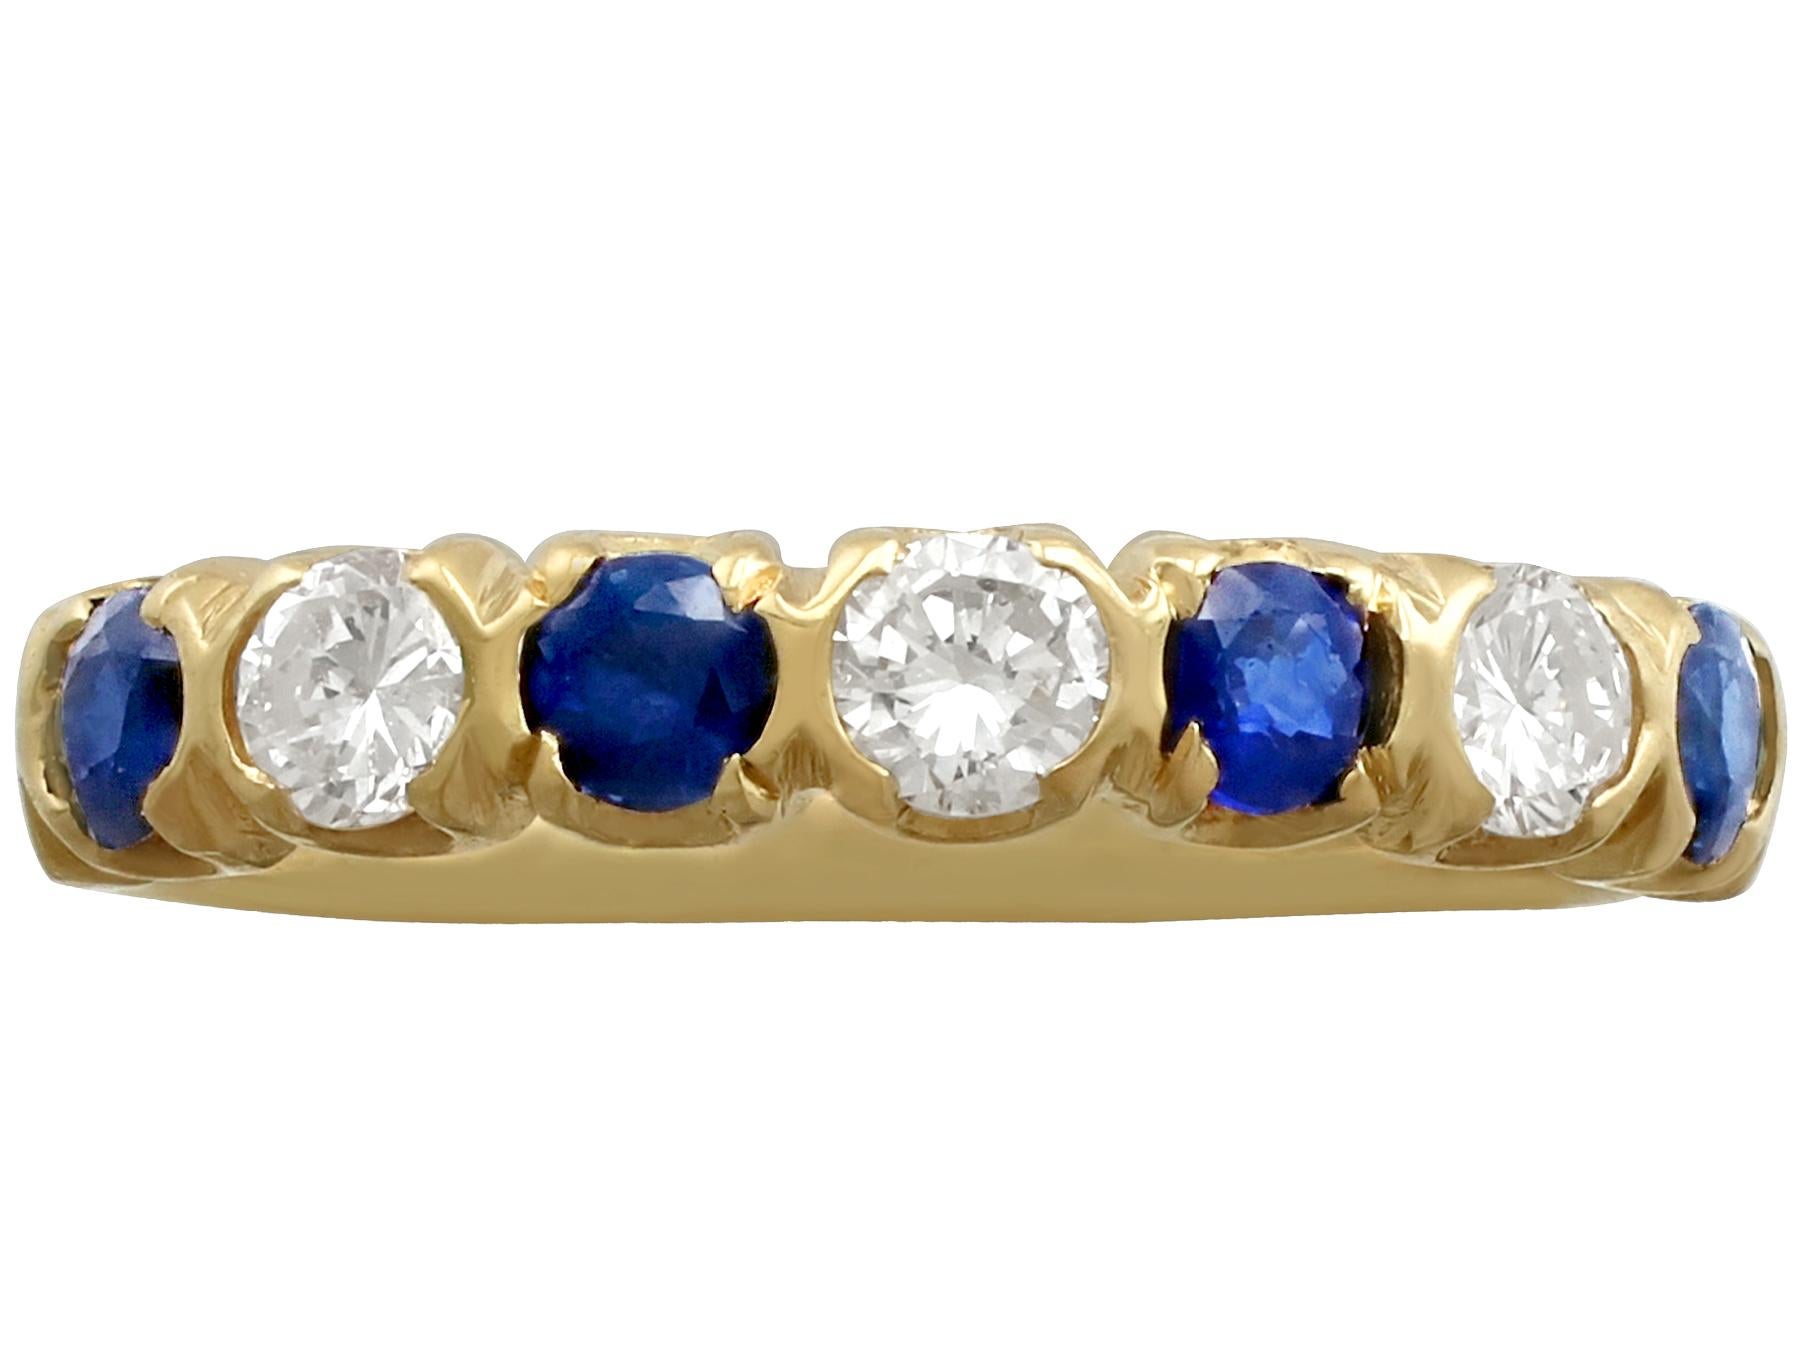 A fine and impressive vintage 0.45 carat blue sapphire and 0.48 carat diamond, 18k yellow gold half eternity ring; part of our vintage jewellery and estate jewelry collections.

This fine and impressive sapphire and diamond eternity ring has been